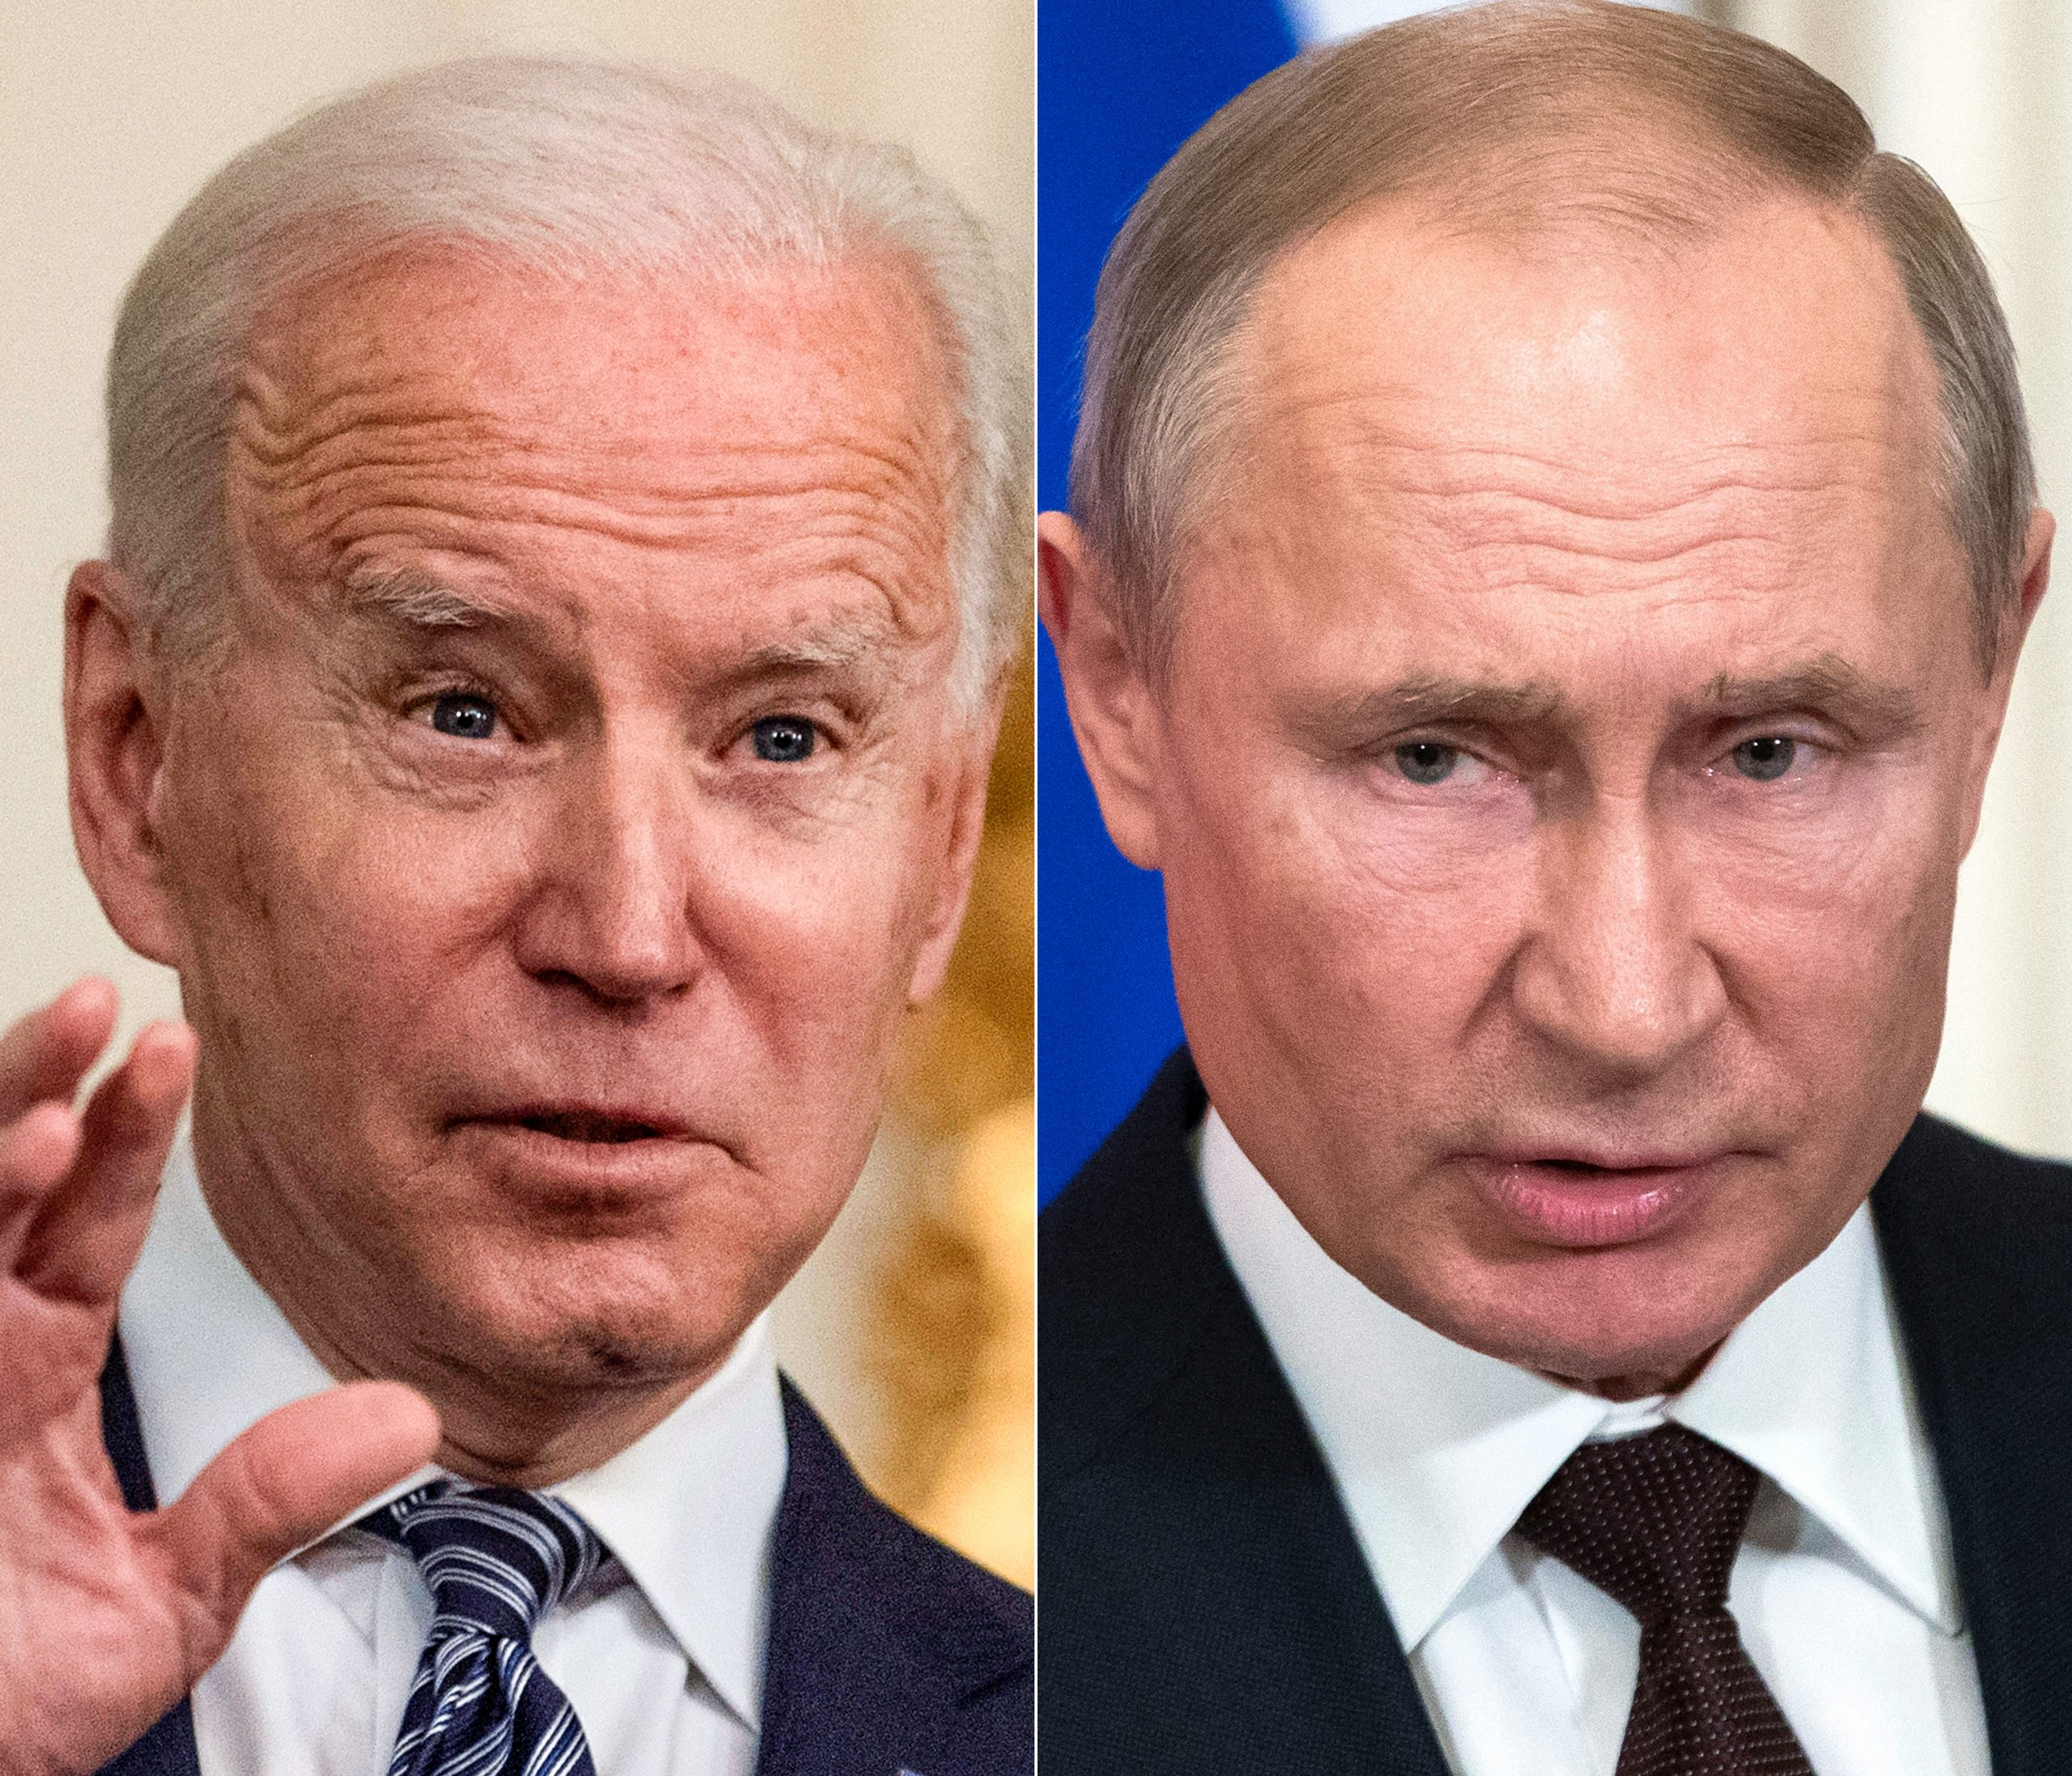 For Vladimir Putin, meeting with Joe Biden is all about respect